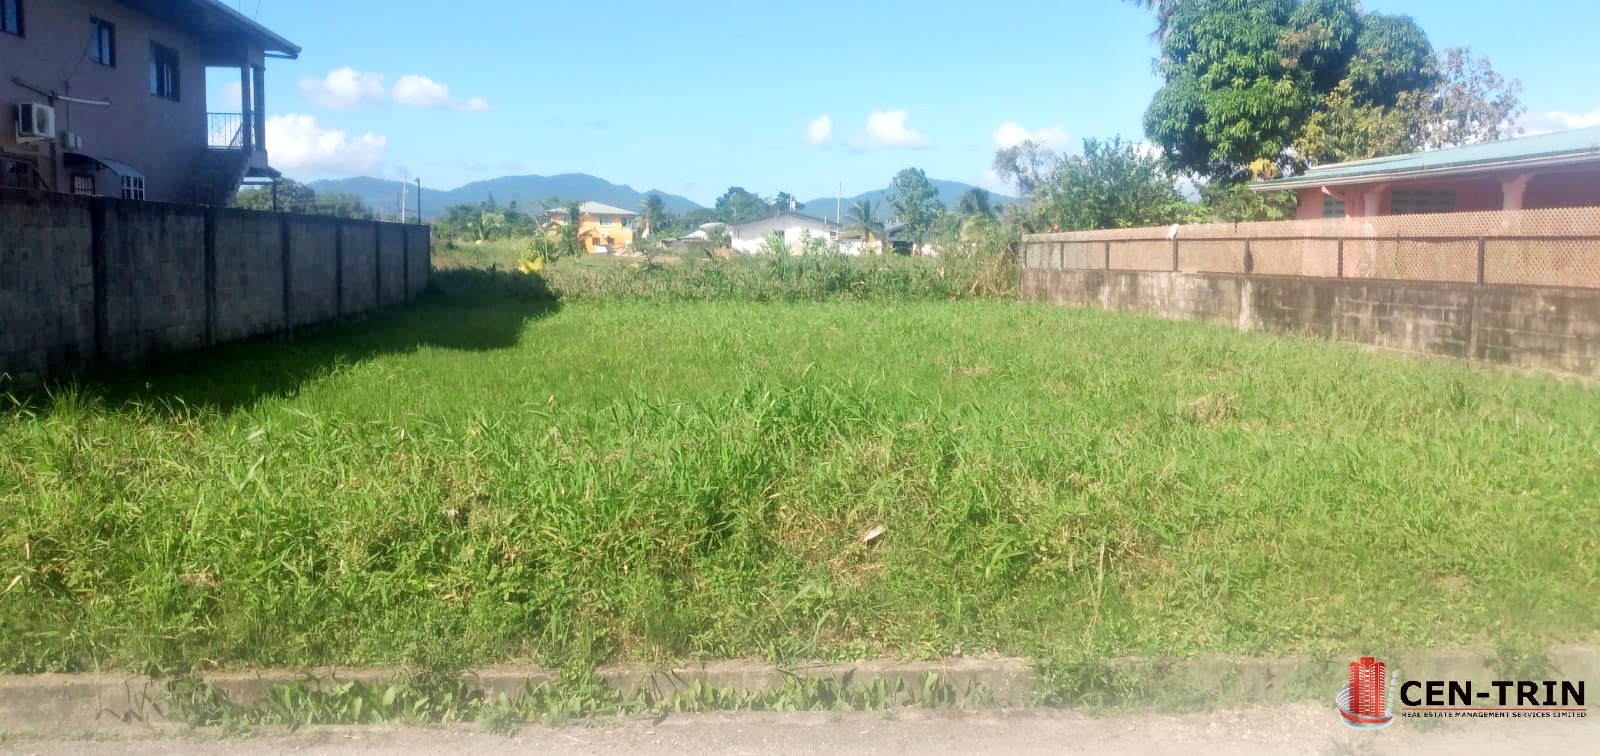 Cen-Trin Real Estate Management Services Limited - Boyee Trace, Madras - 1 Lot for Sale - $350K